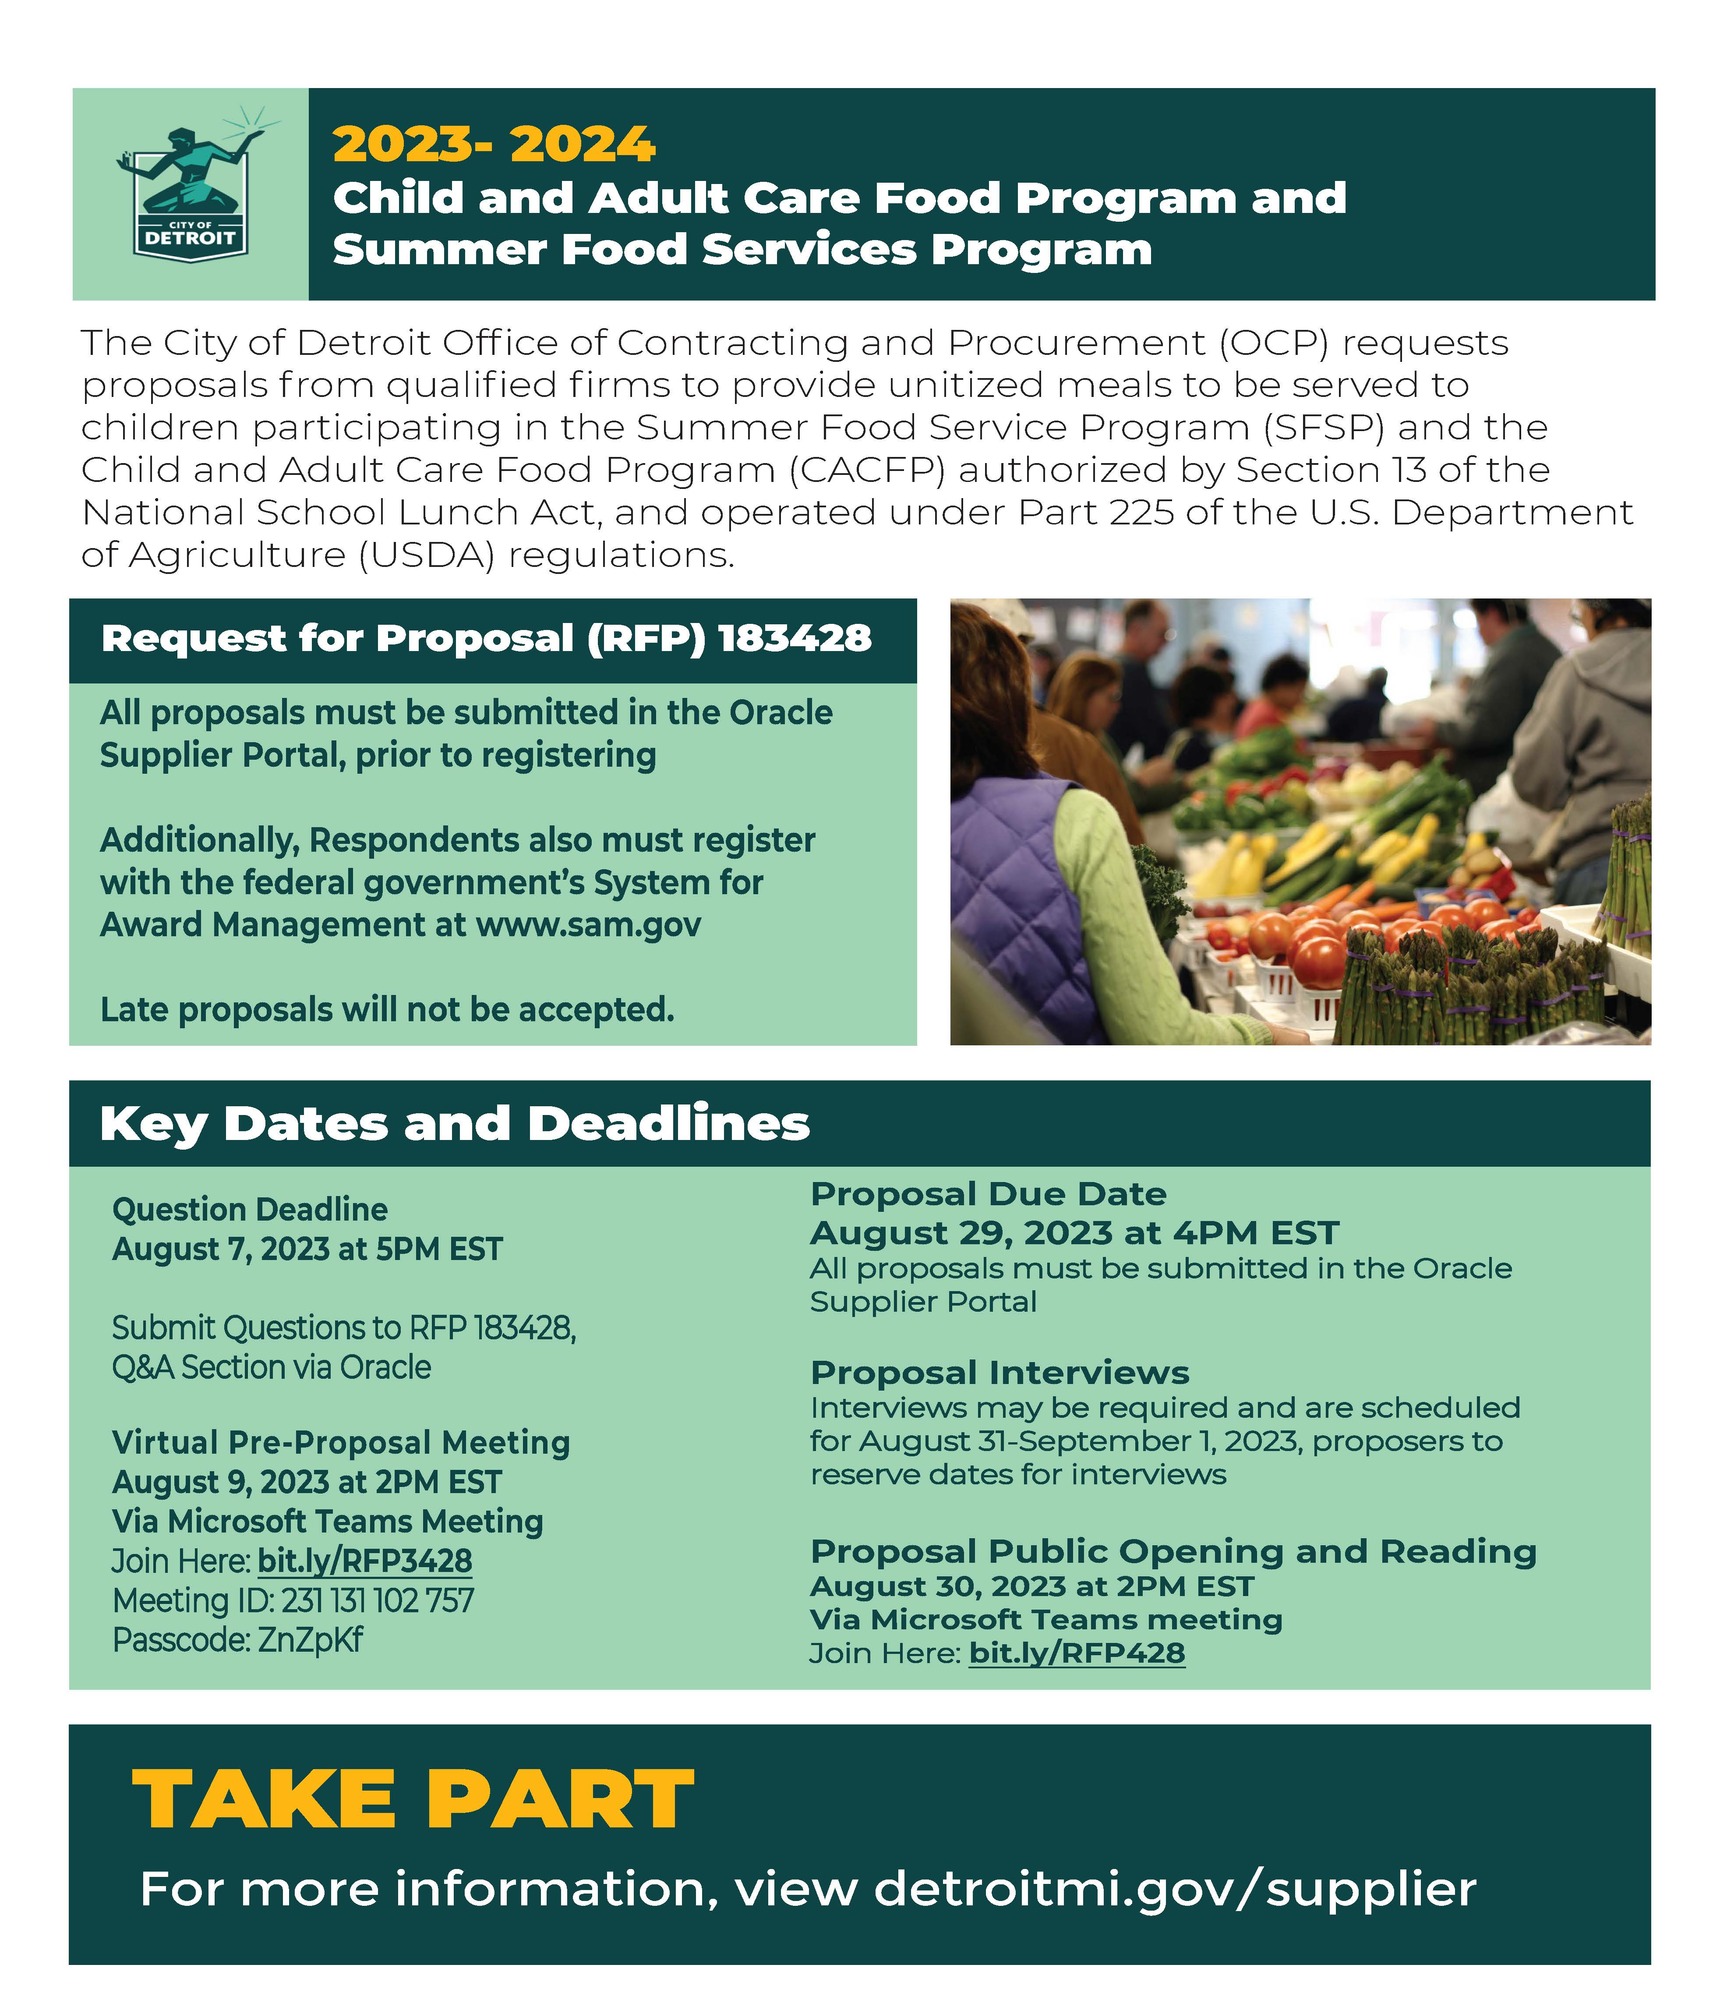 Take Part 20232024 Child and Adult Care Food Program and Summer Food